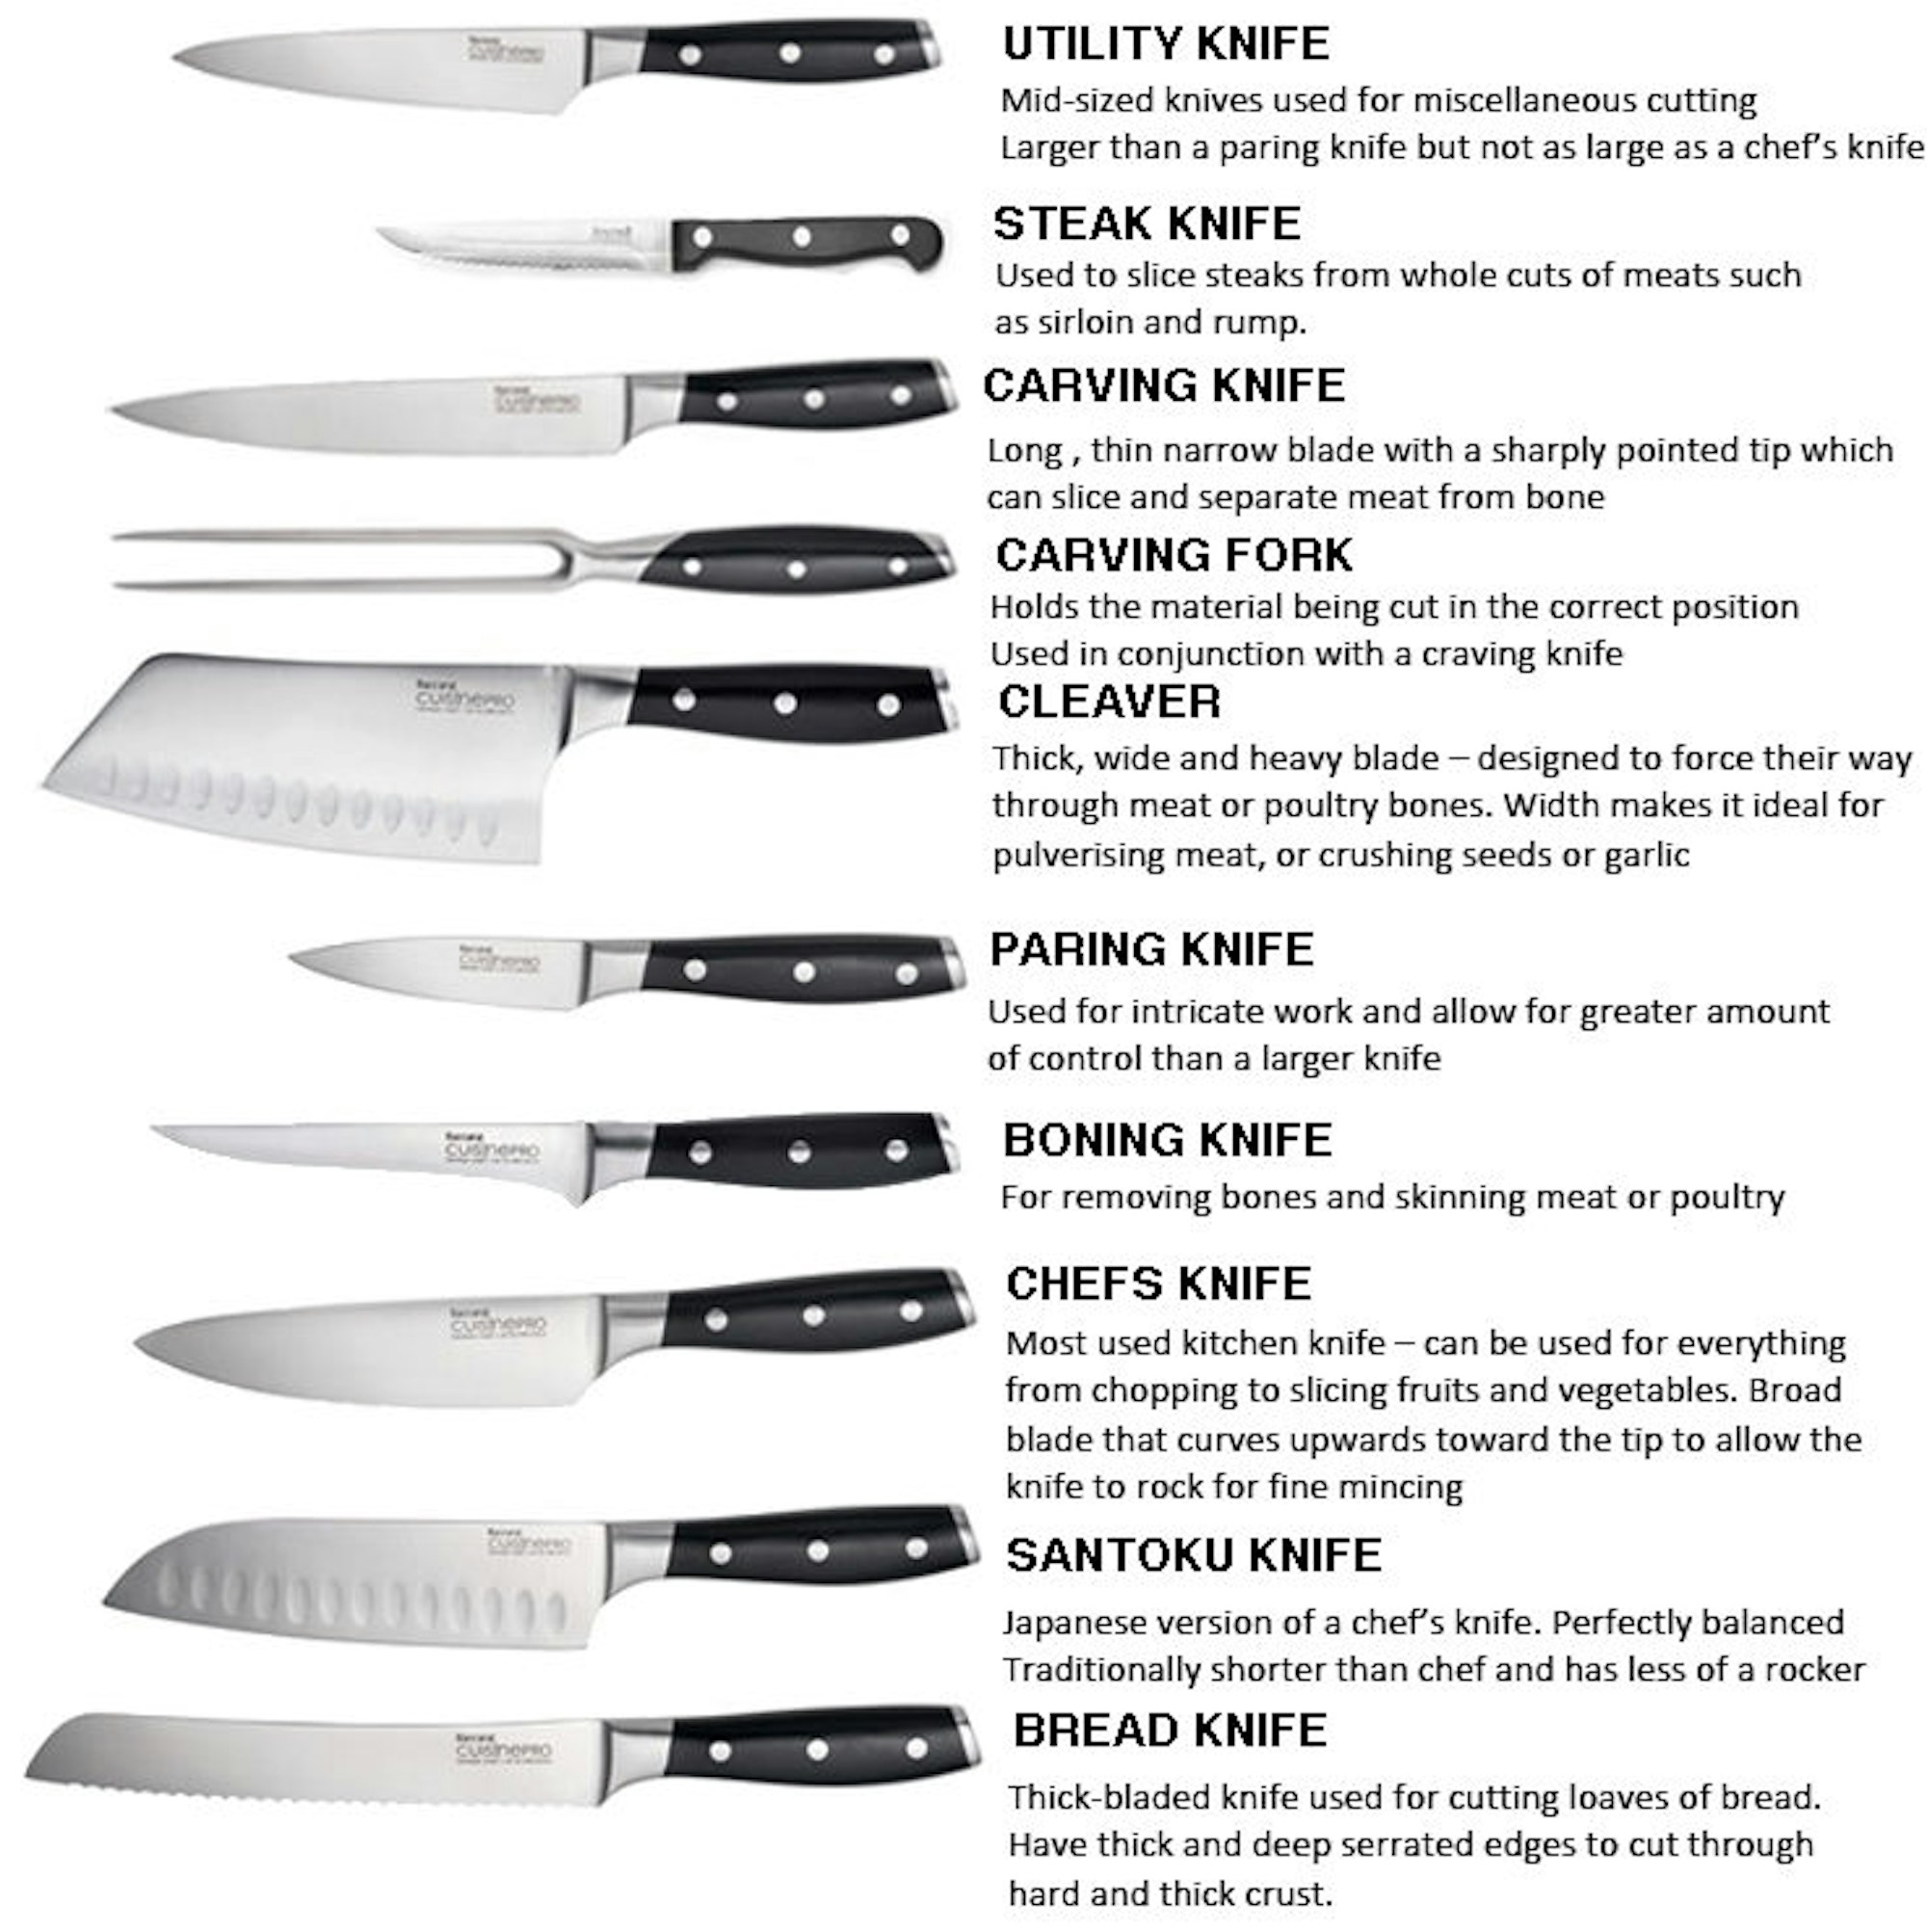 Types of knives and their functions infographic